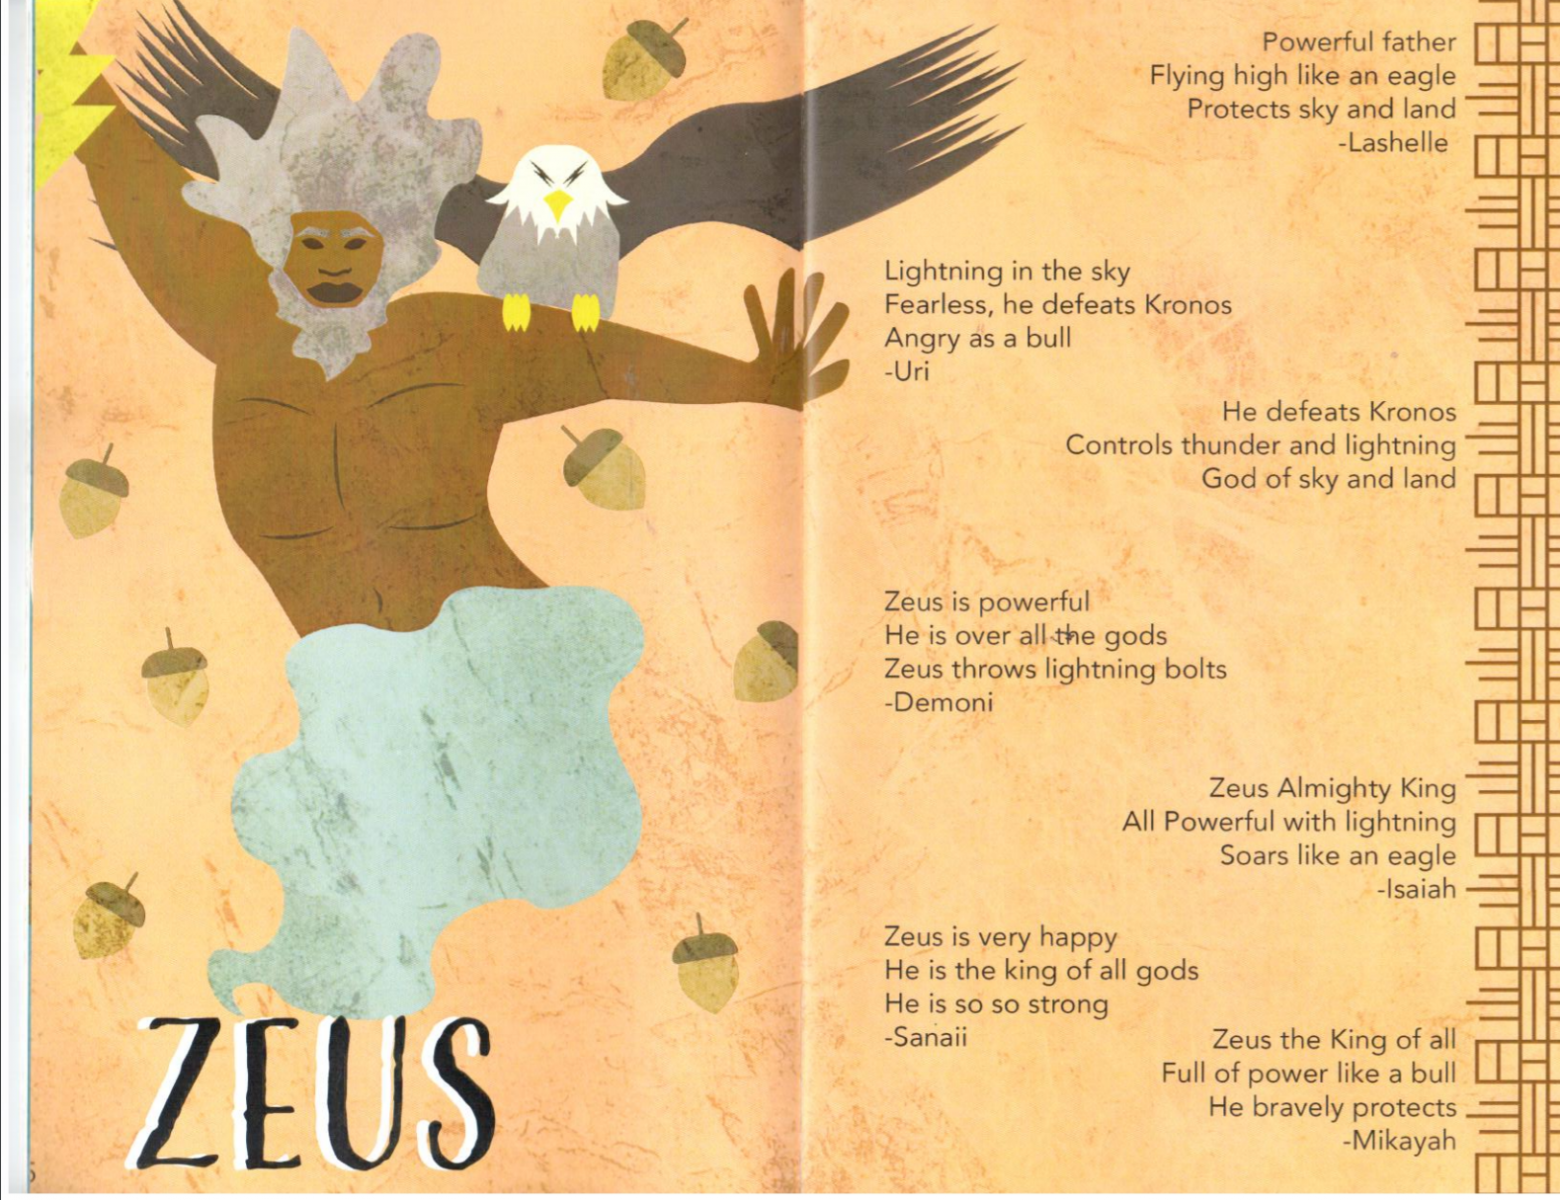 An illustration of Zeus with brown skin and gray hair, with an eagle perched on his shoulder. To the right are short poems by students.